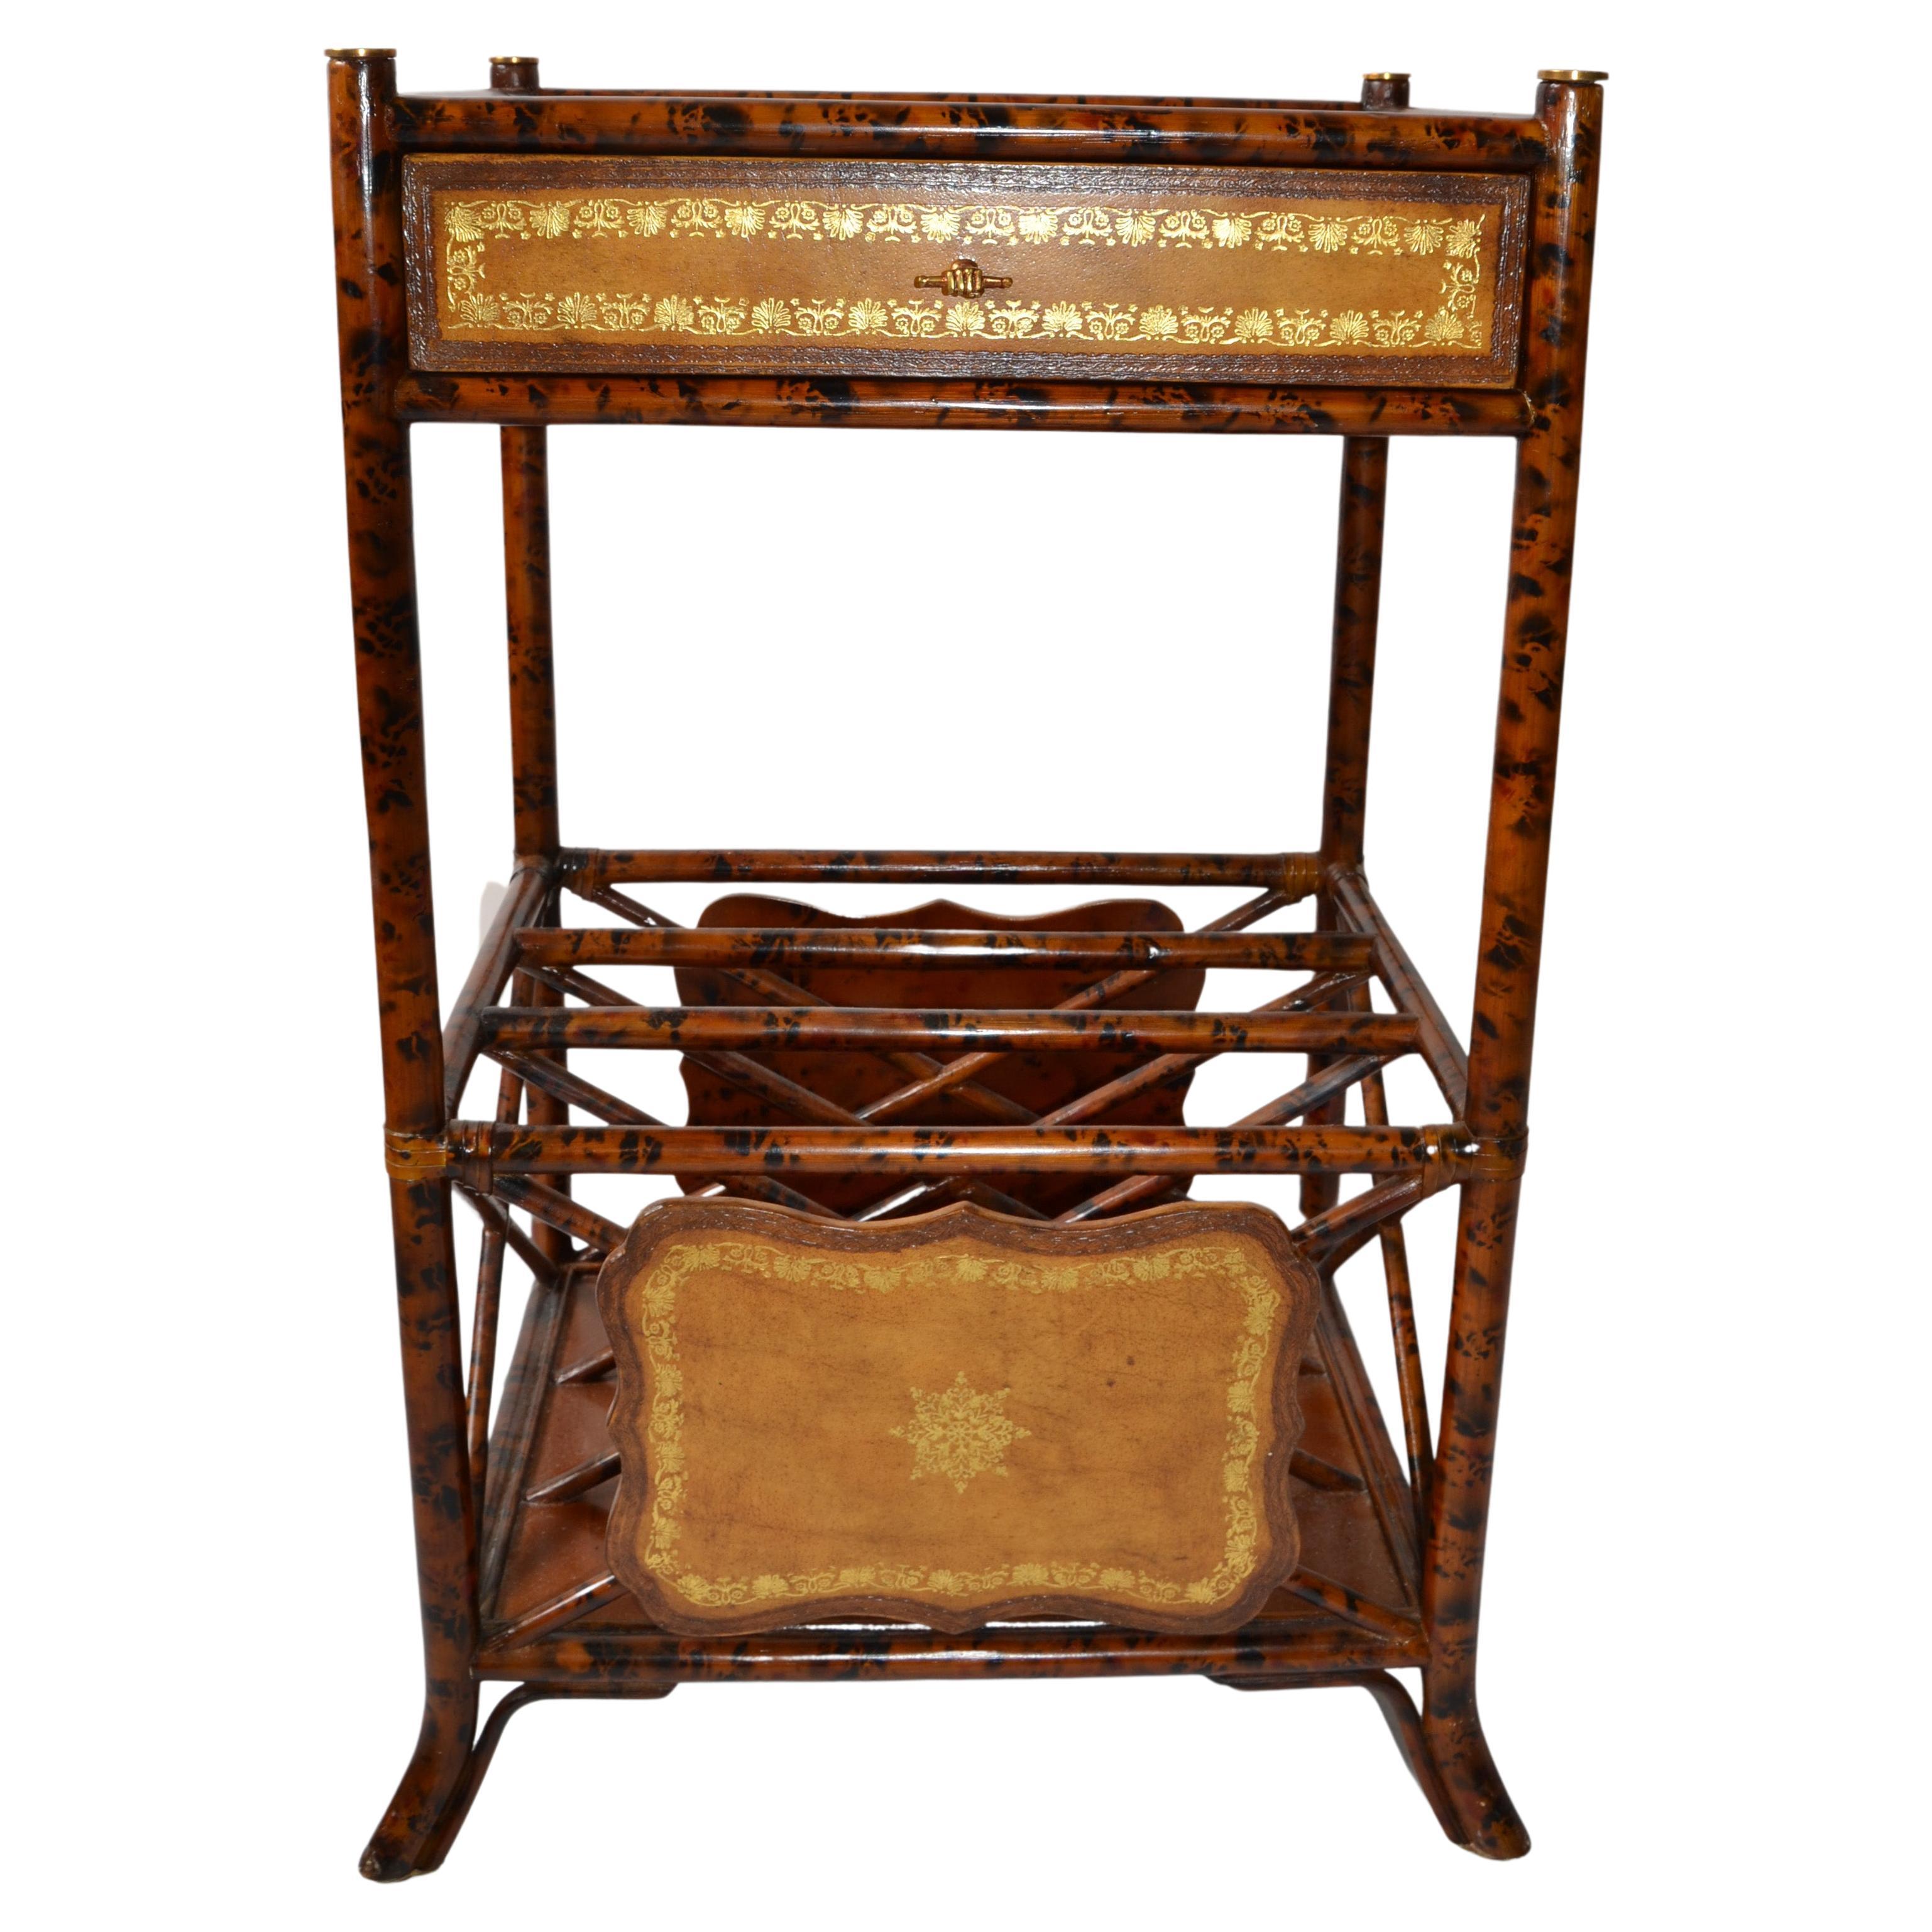 Maitland-Smith British Colonial Style End Table or stand with a faux tortoise finish over a turned wood faux bamboo frame.
Featuring Gold Leaf tooled brown leather panels, one drawer with distinctive Hand Brass Pull Hardware, Magazine racks and